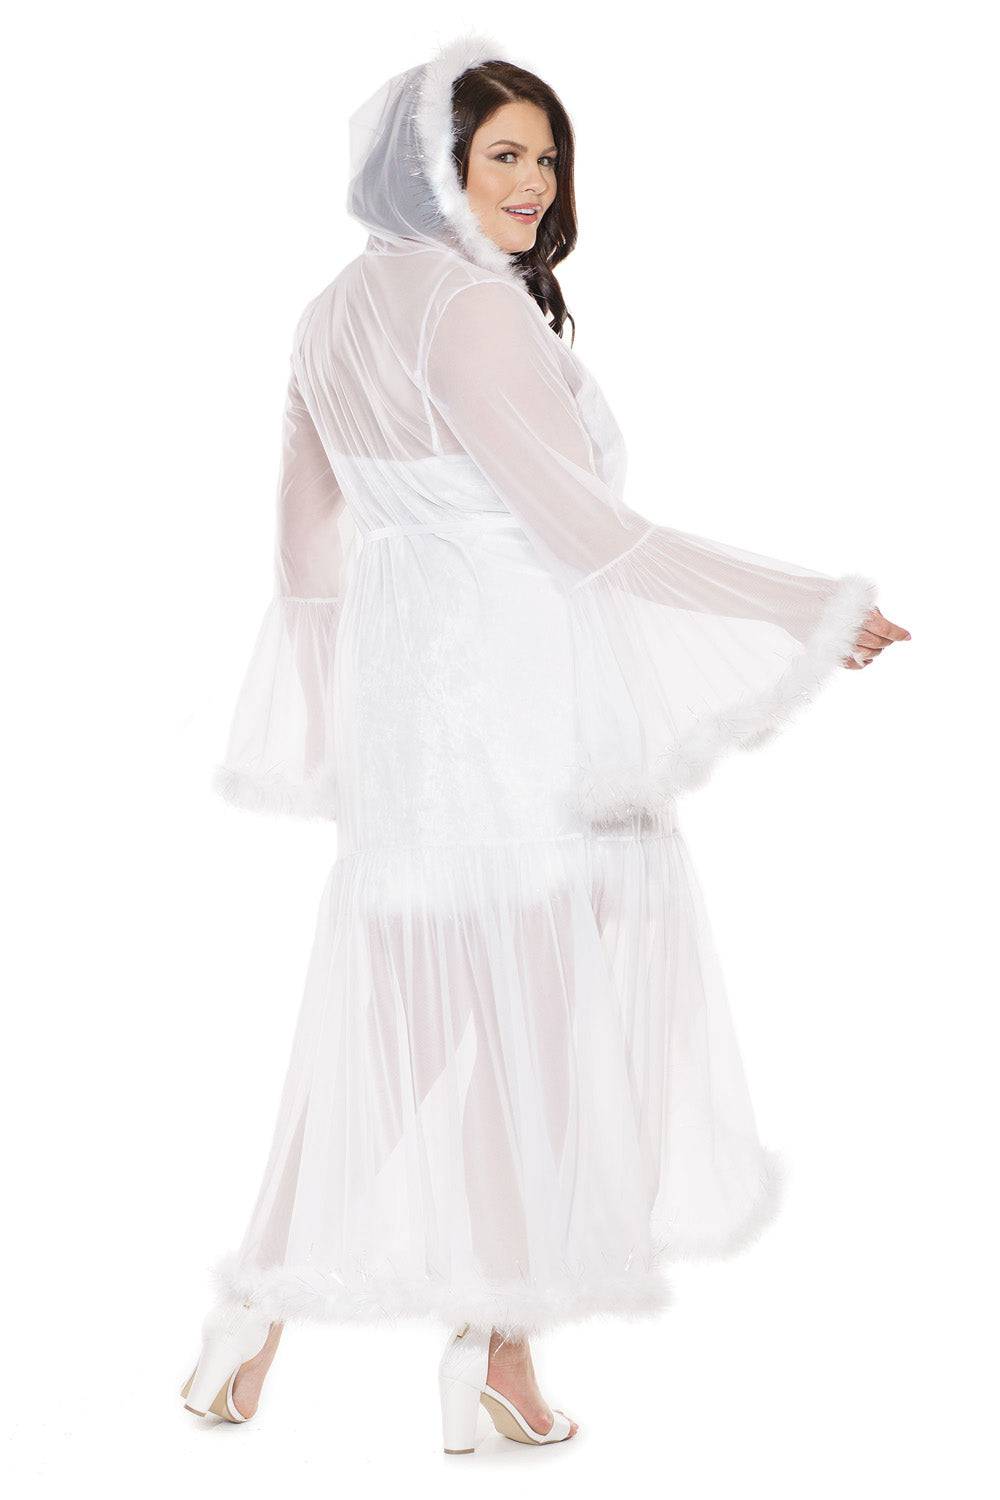 Coquette - 3880 - Full Length Robe - White - OS - Stag Shop